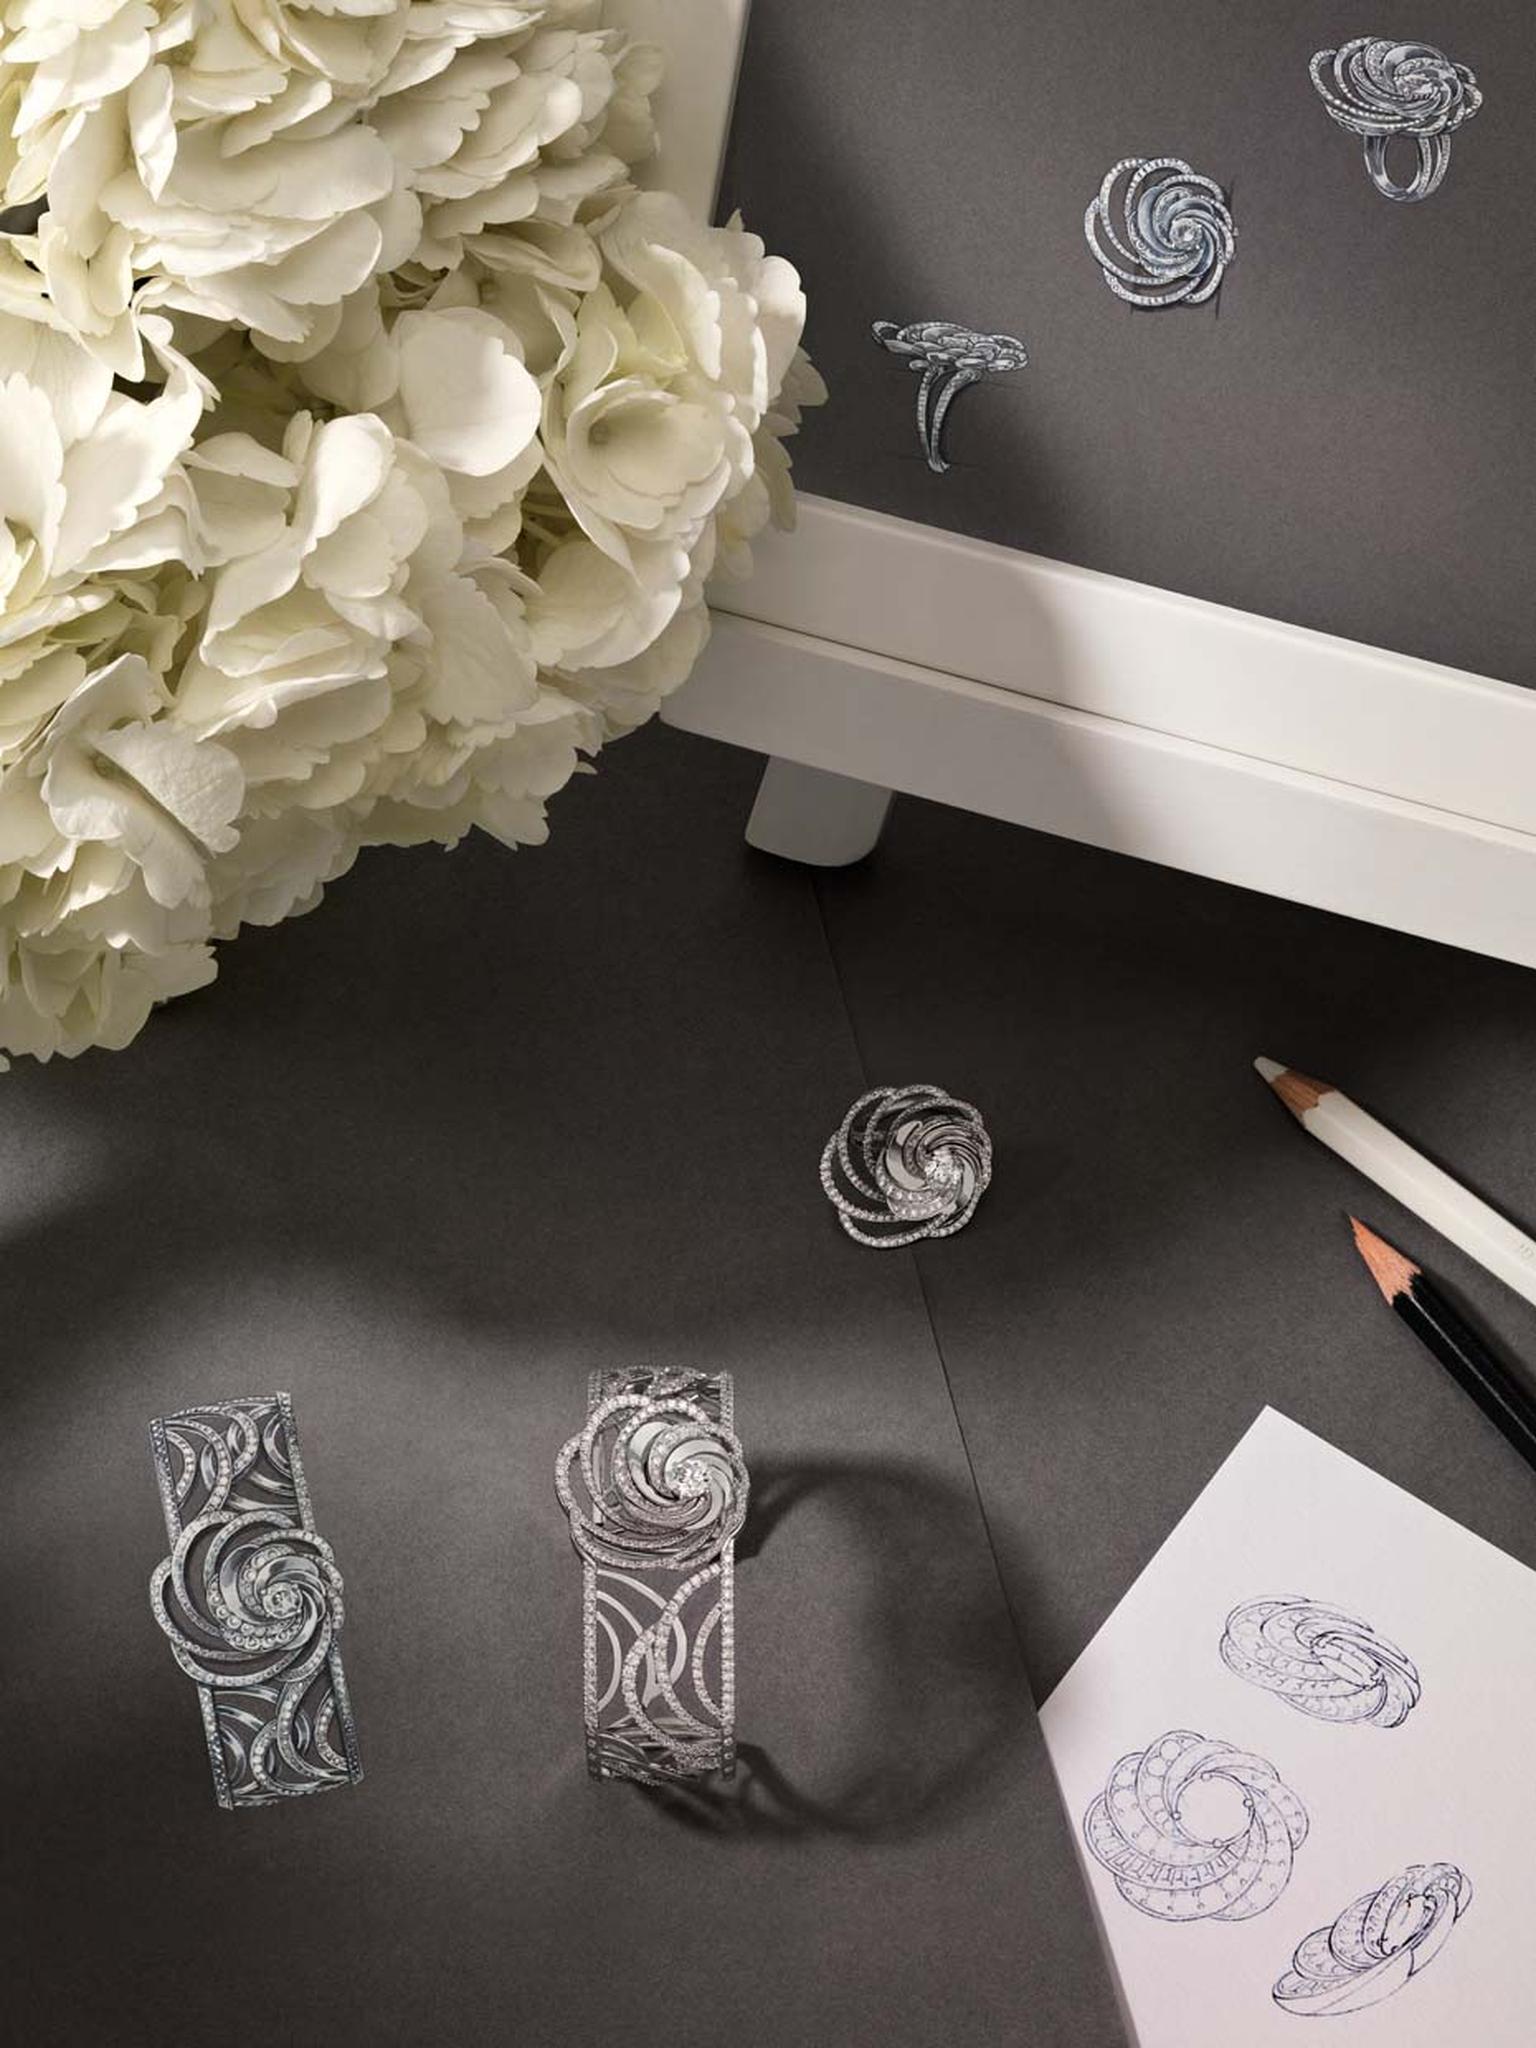 Sketches of De Beers' new Aria jewels alongside a finished bracelet.